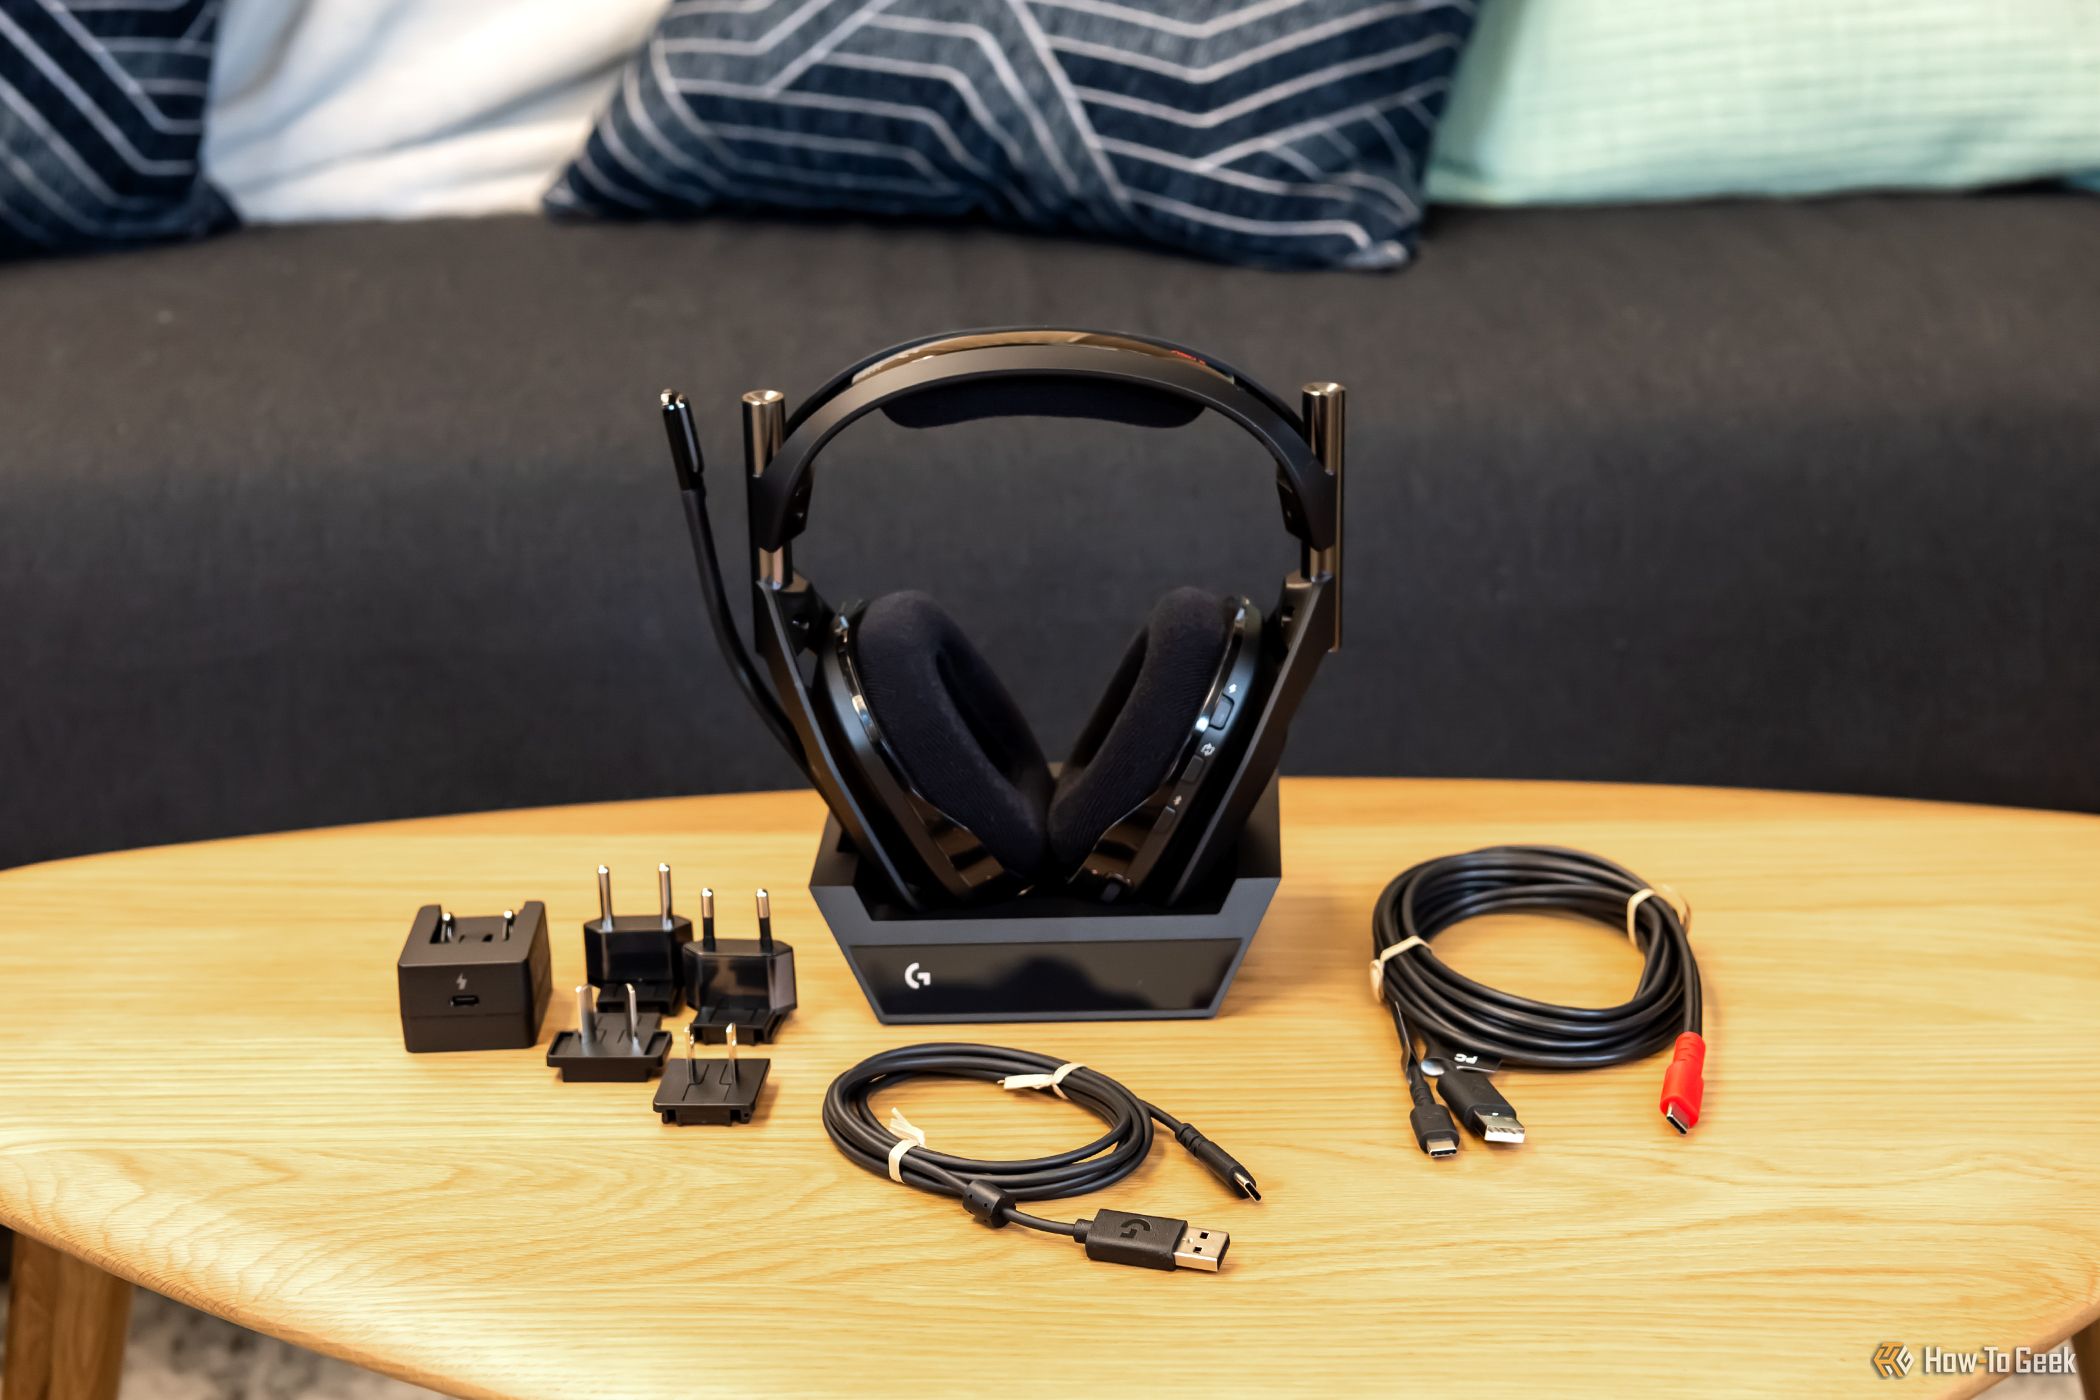 High-Performance Gaming Audio : Astro A50 X Gaming Headset